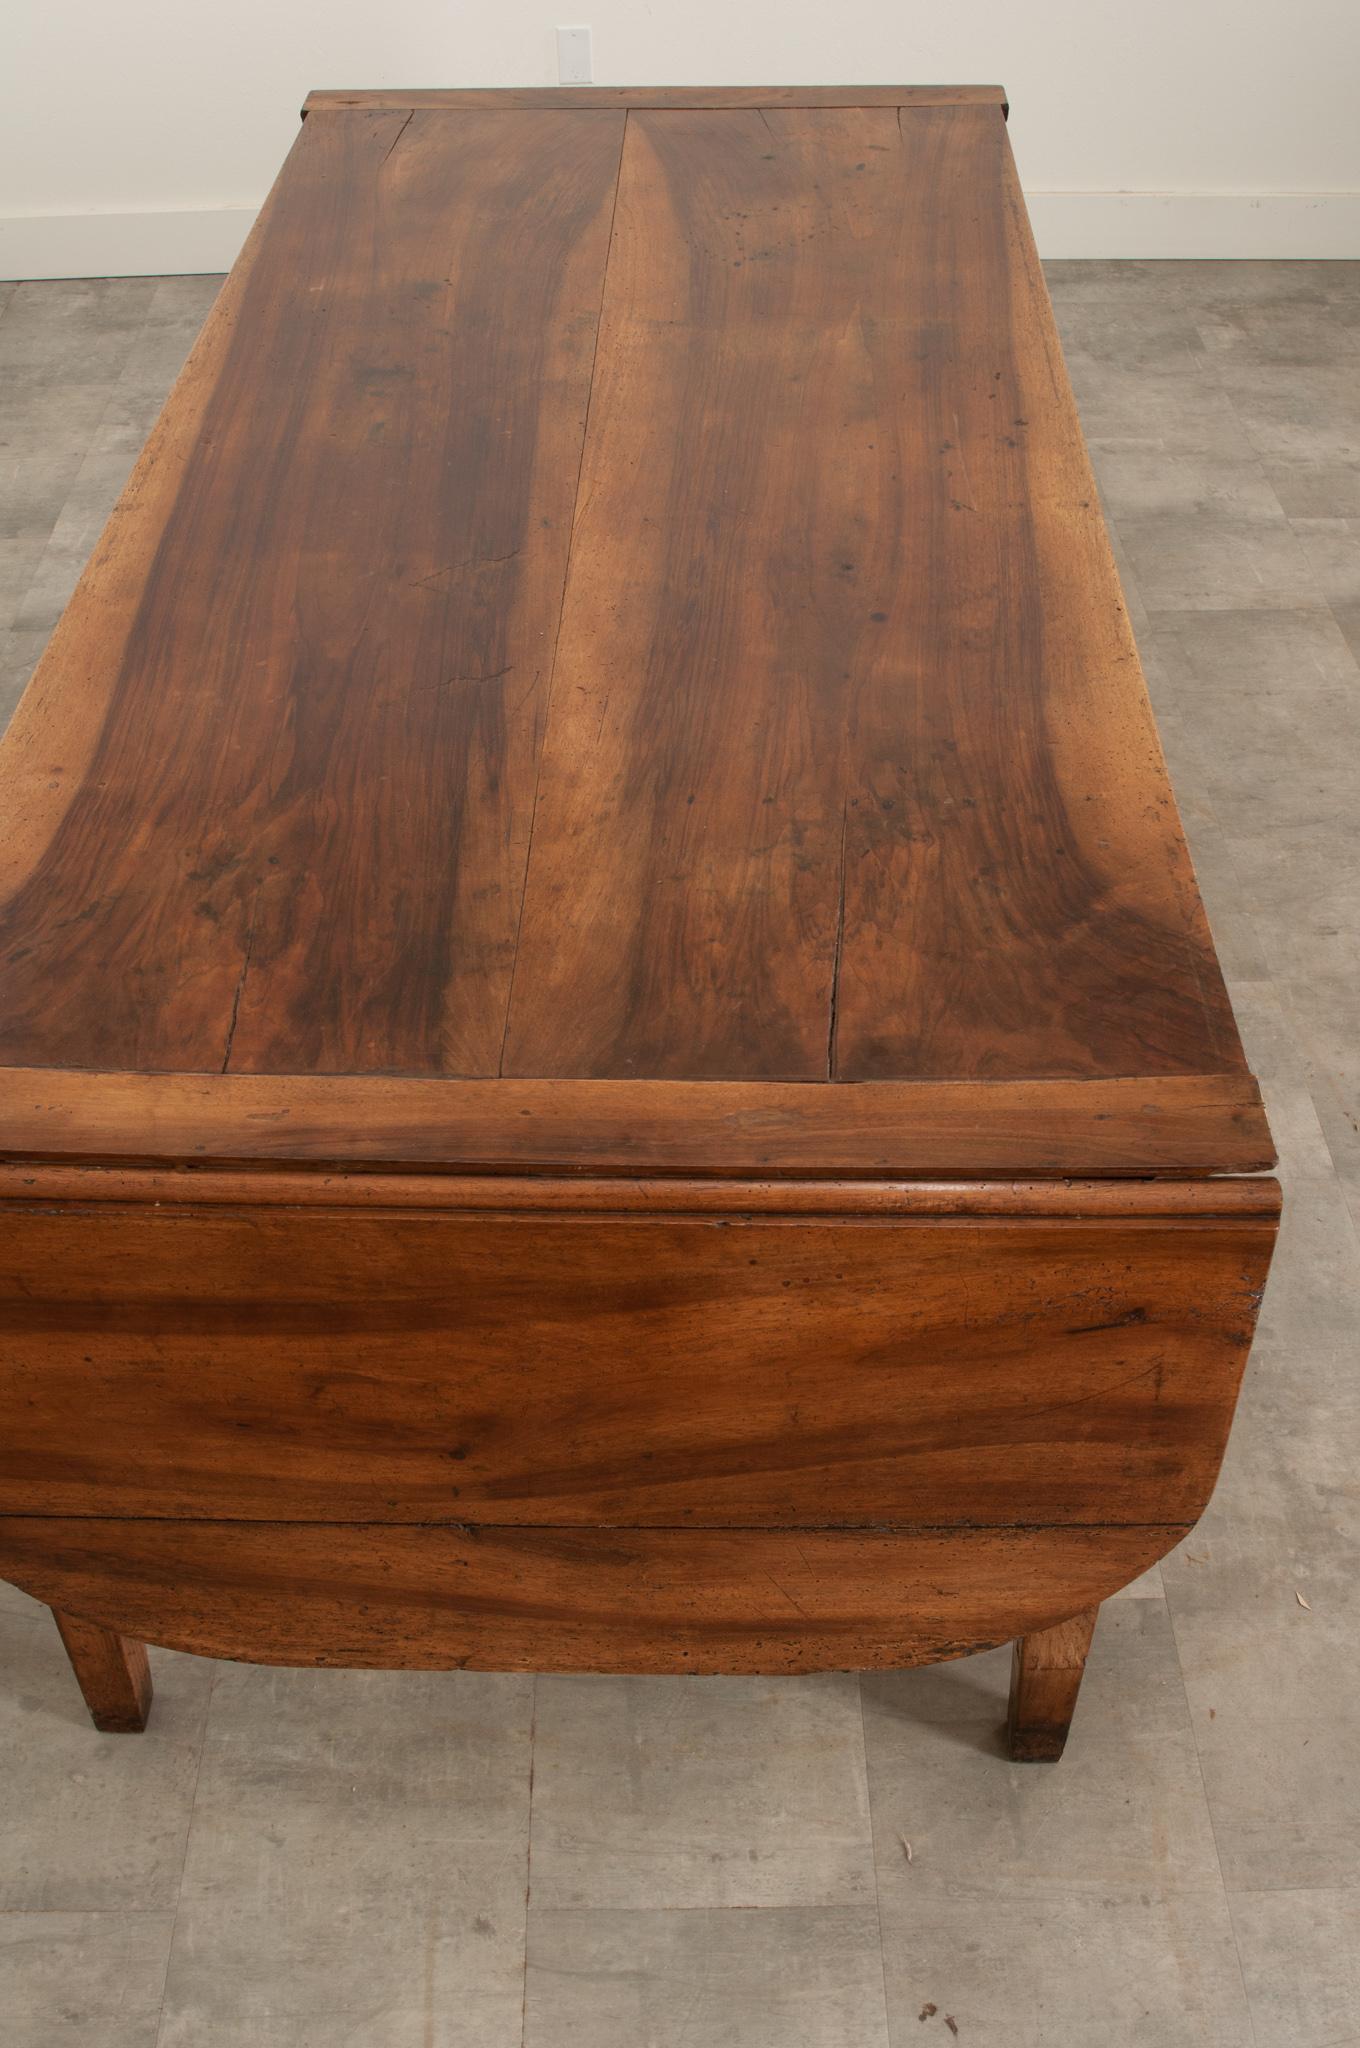 French 18th Century Walnut Drop Leaf Dining Table In Good Condition For Sale In Baton Rouge, LA